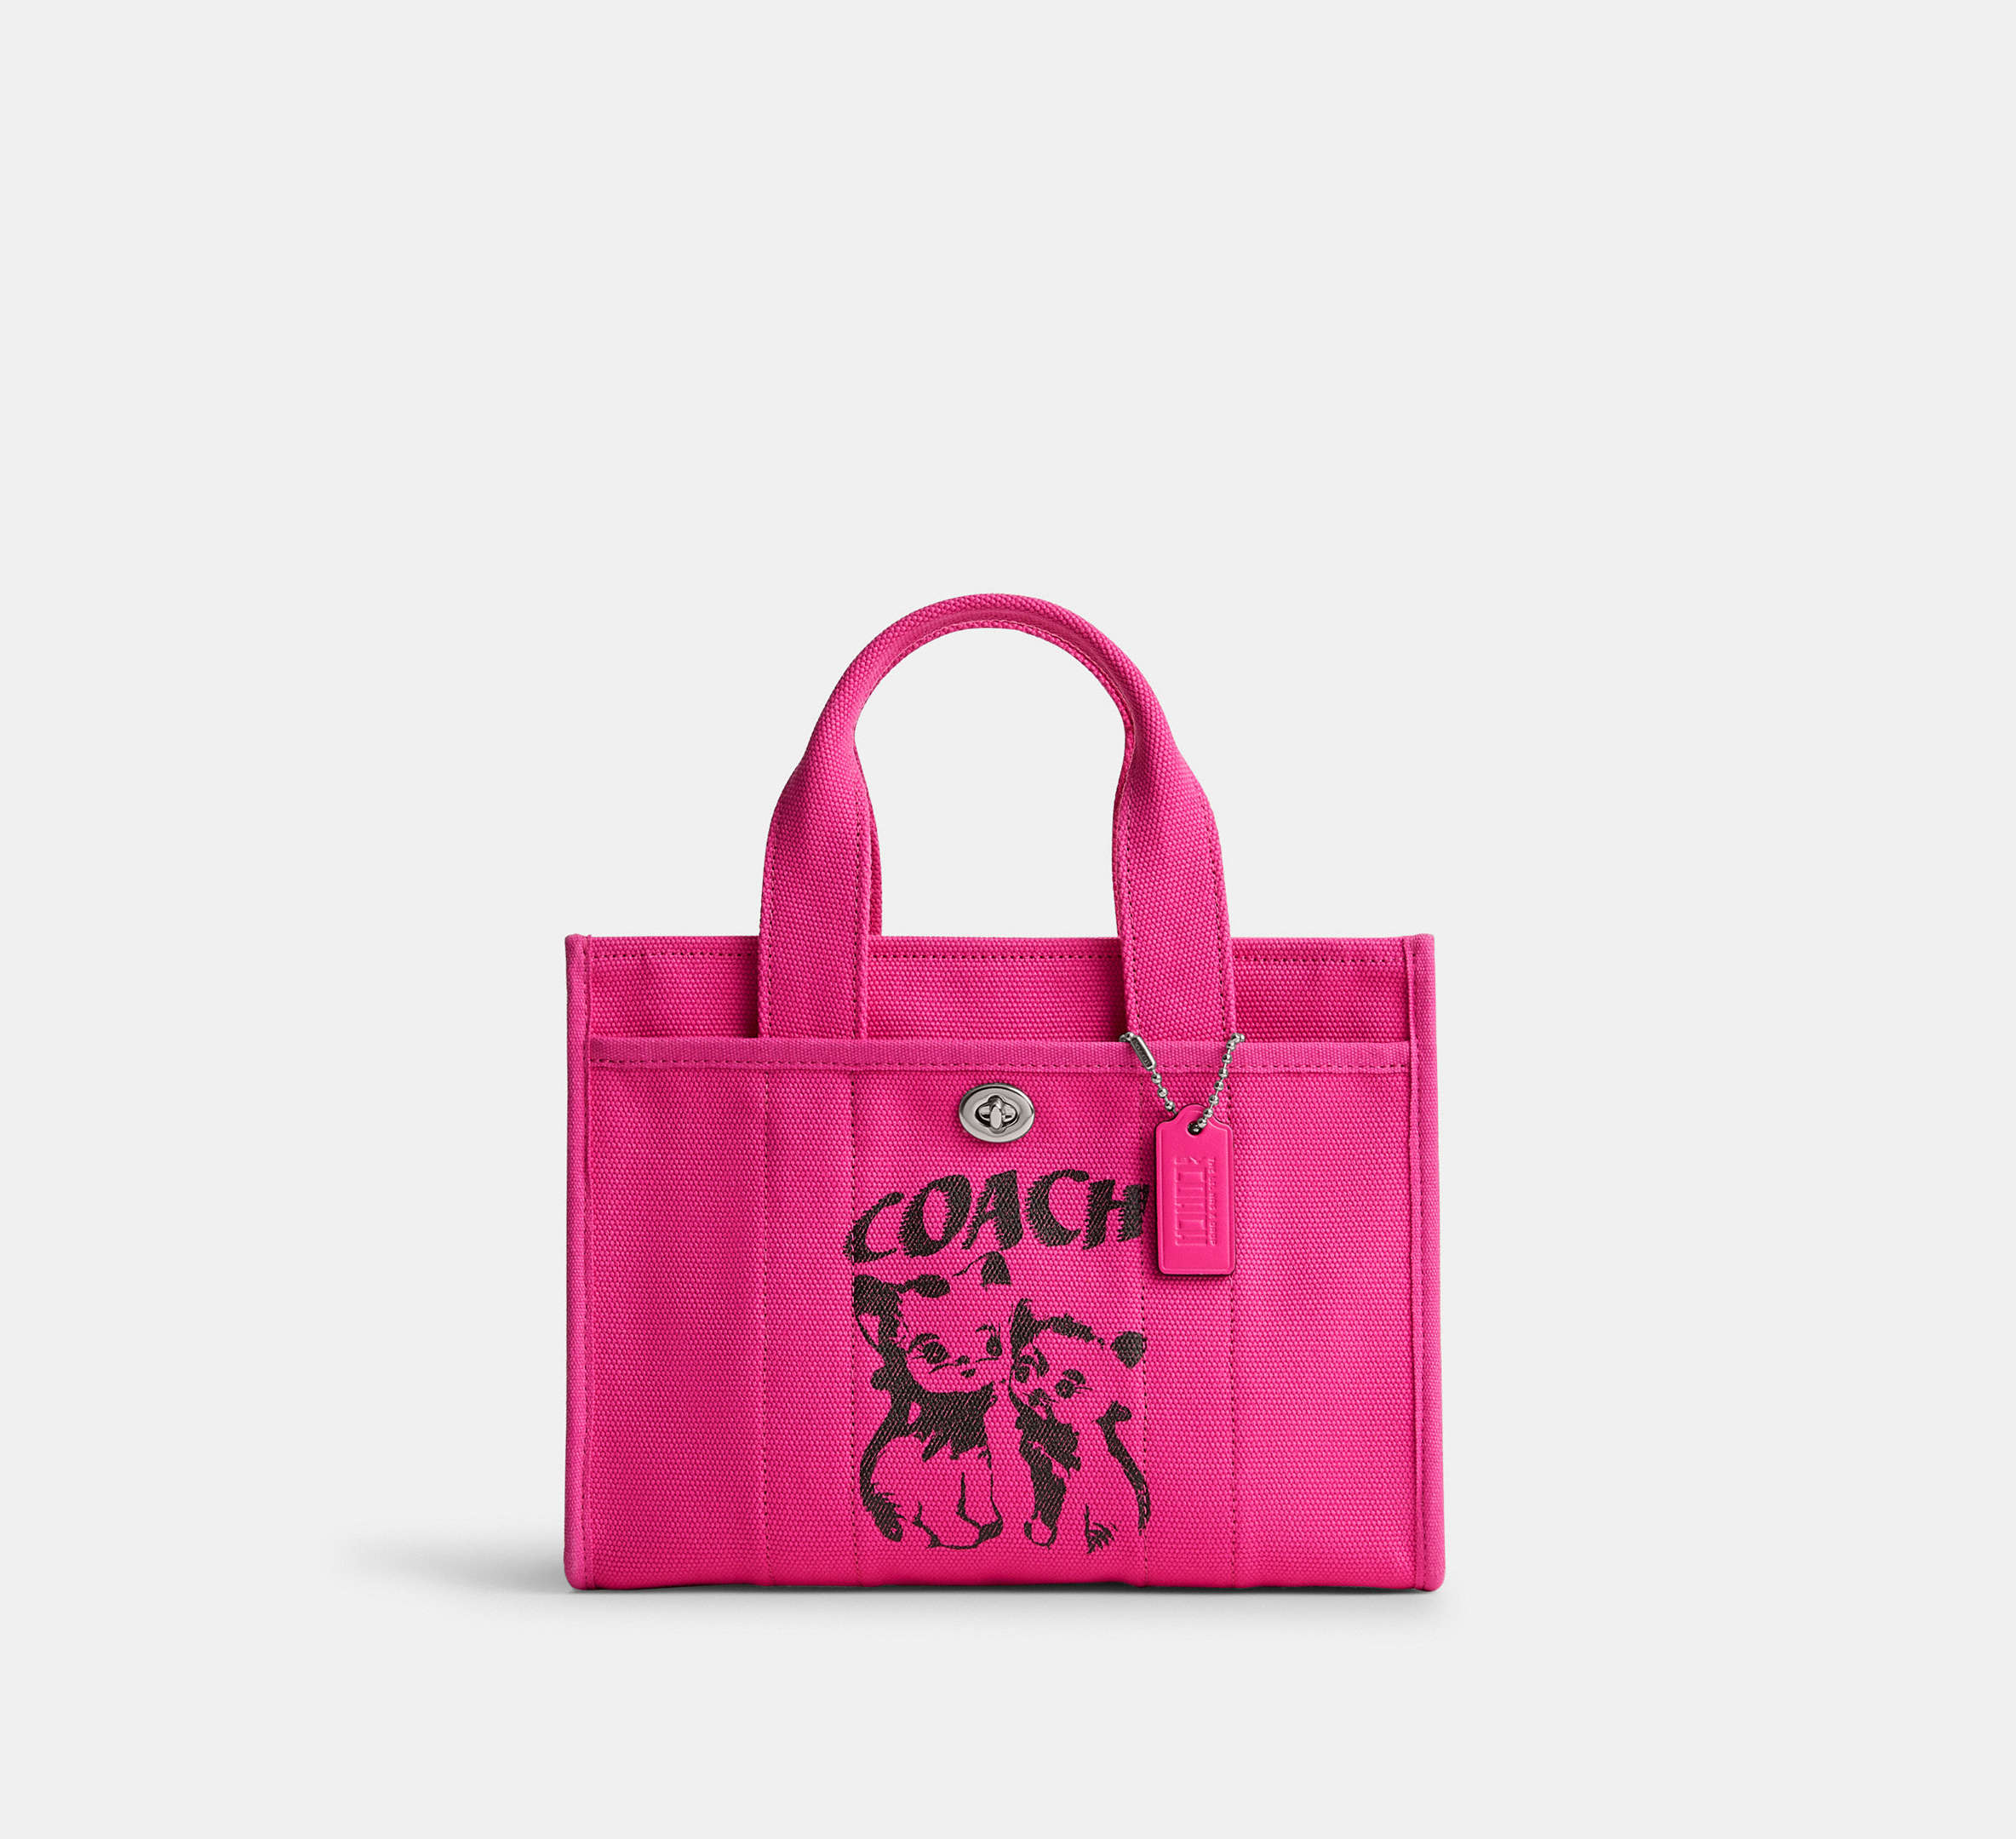 Coach Tote 26 The Lil Nas X Drop Cargo